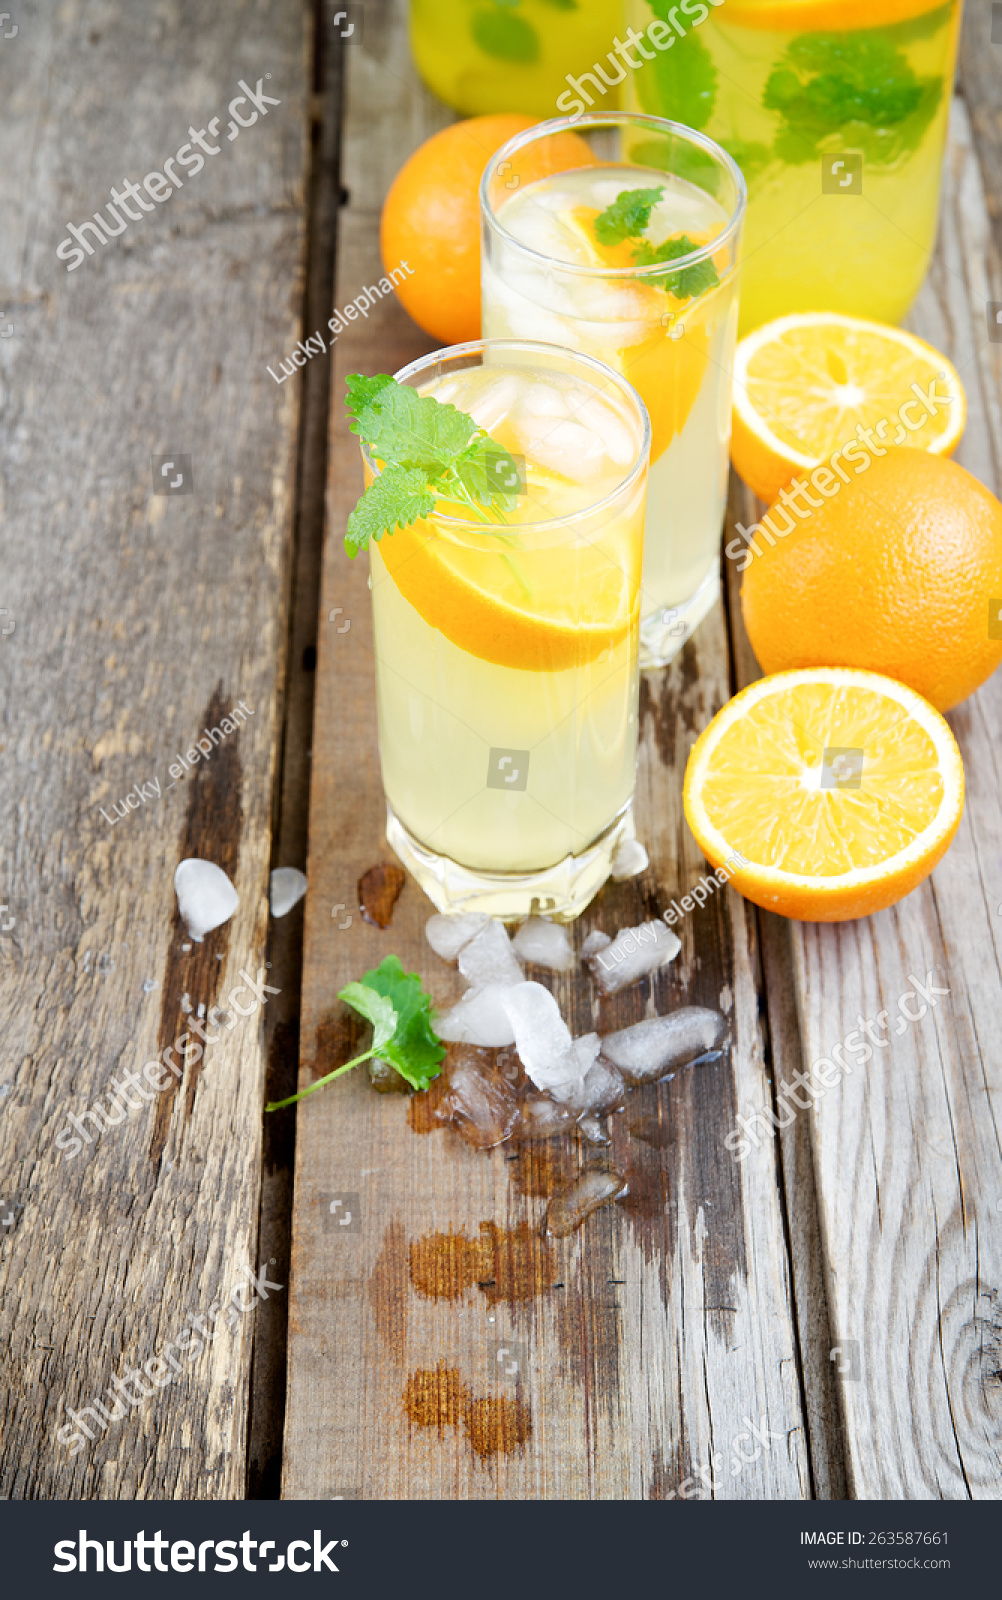 Cold orange soda in a glass on a wooden background #263587661